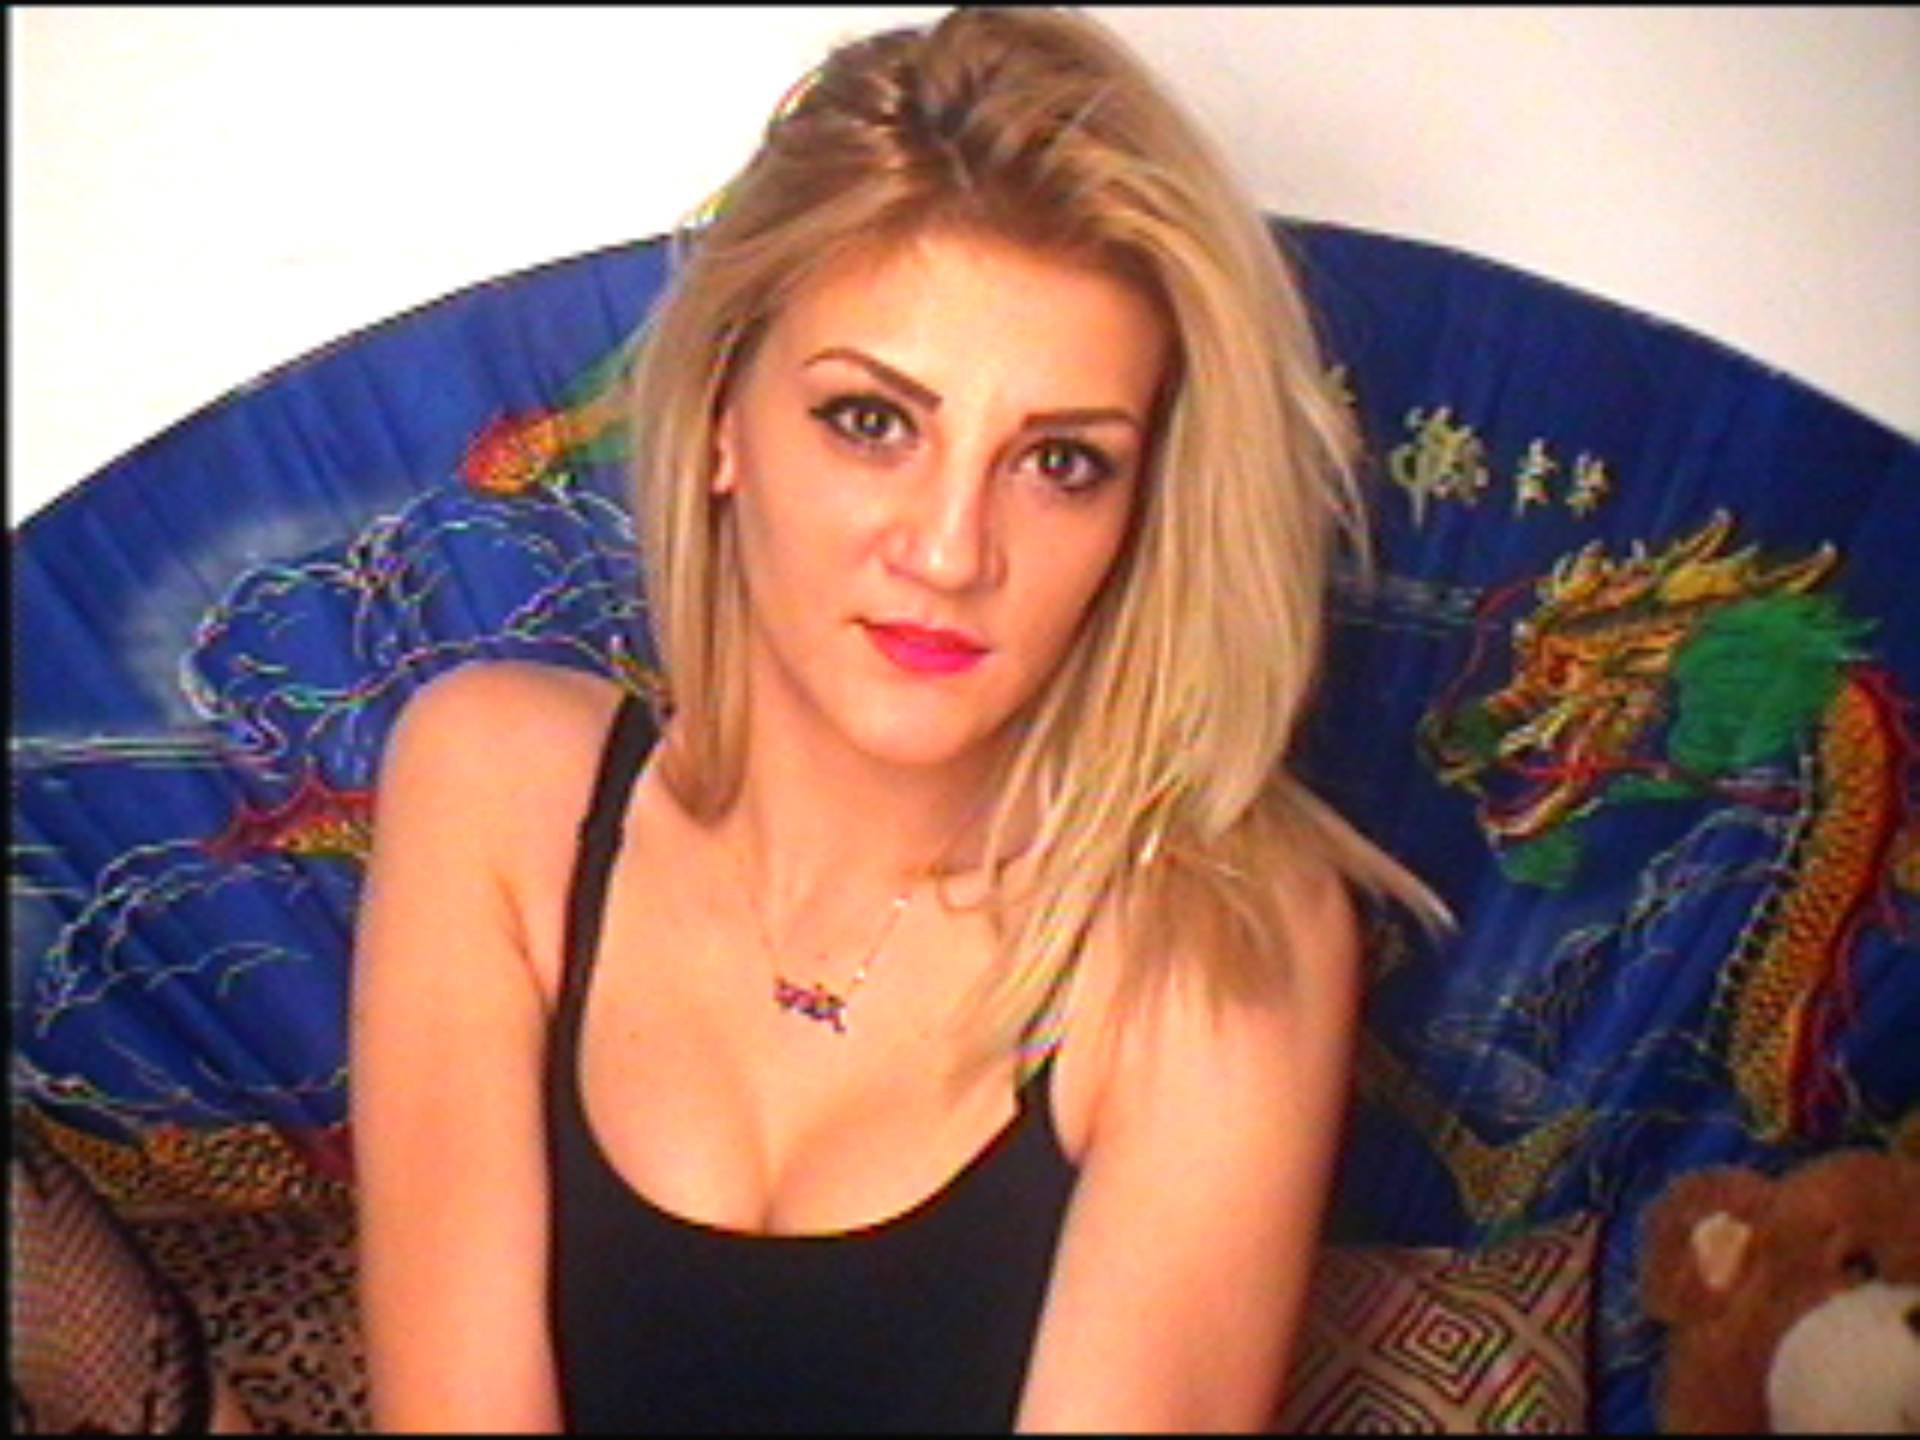 Image of cam model SarahFontain from XloveCam